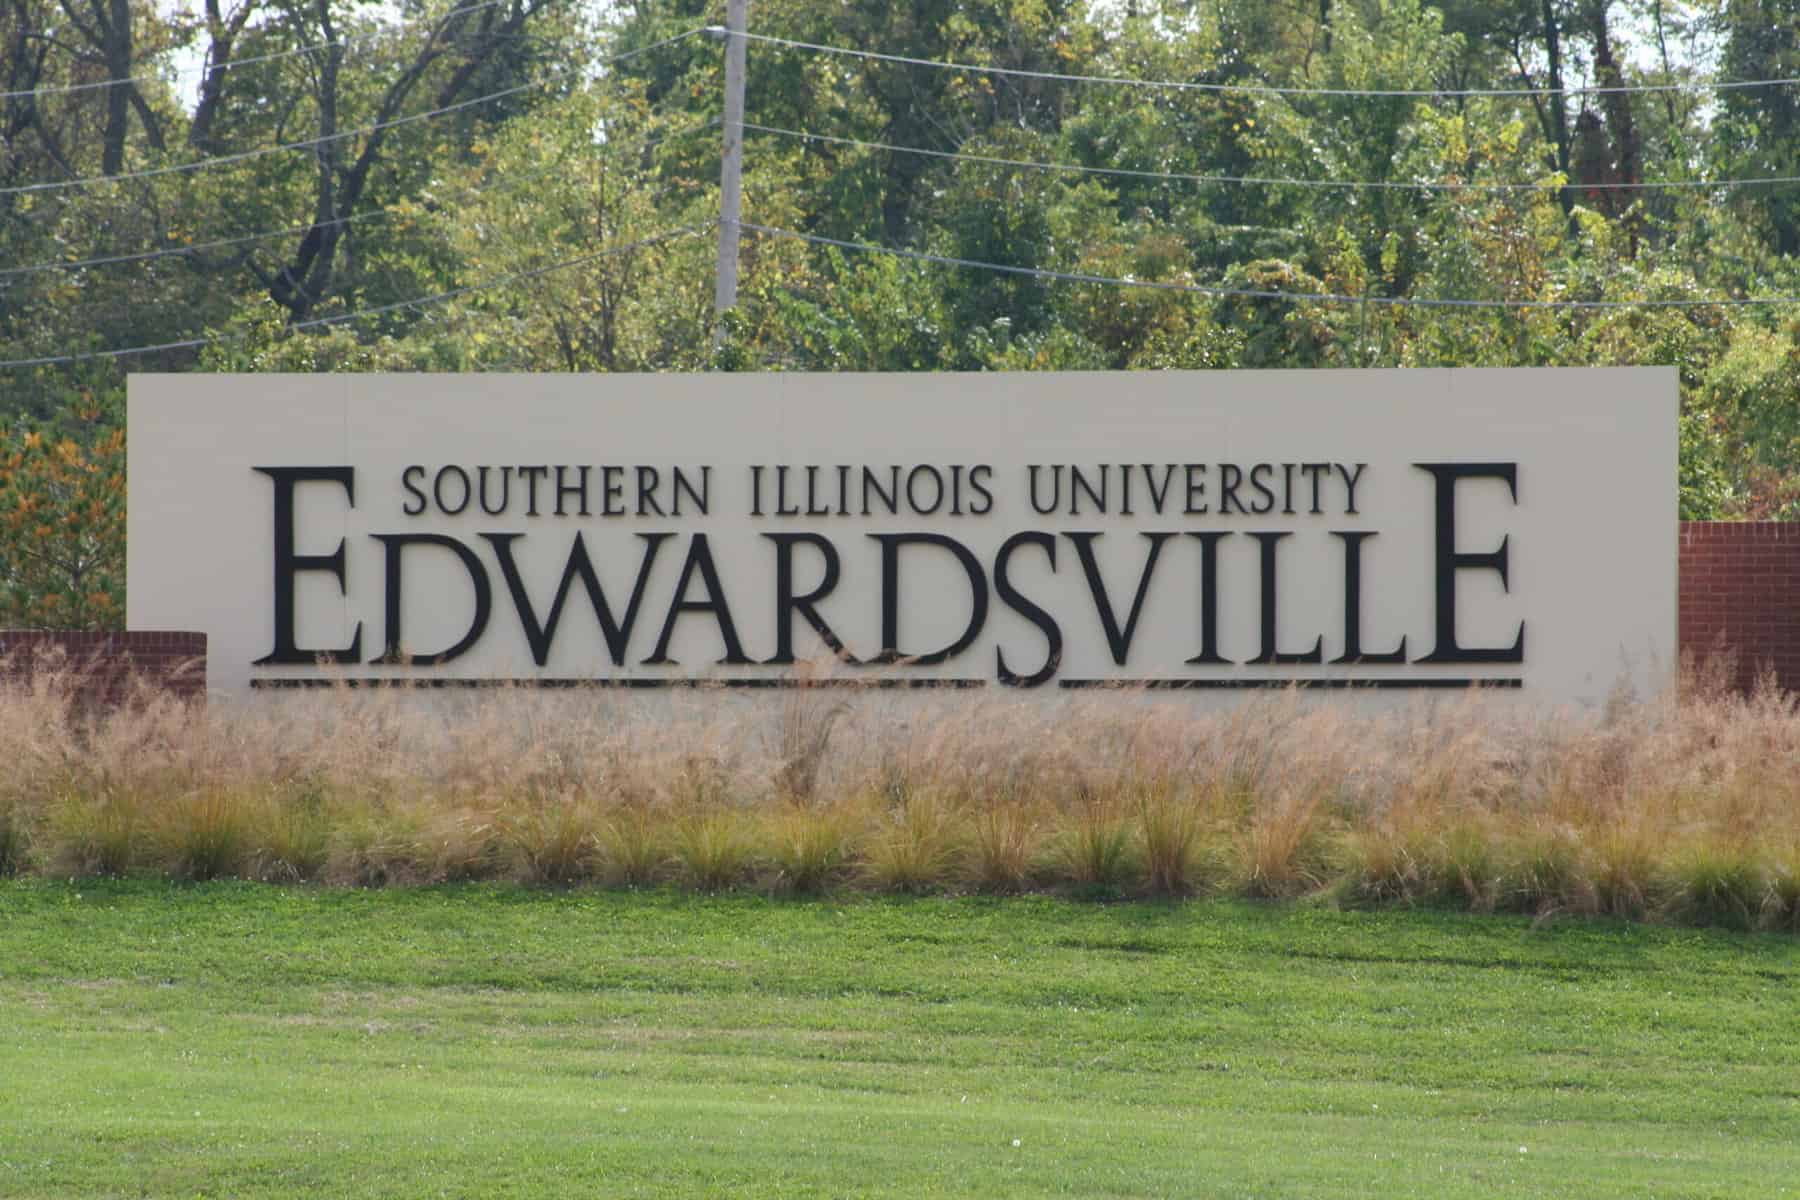 The sign for Southern Illinois University at Edwardsville is shown surrounded by grass.